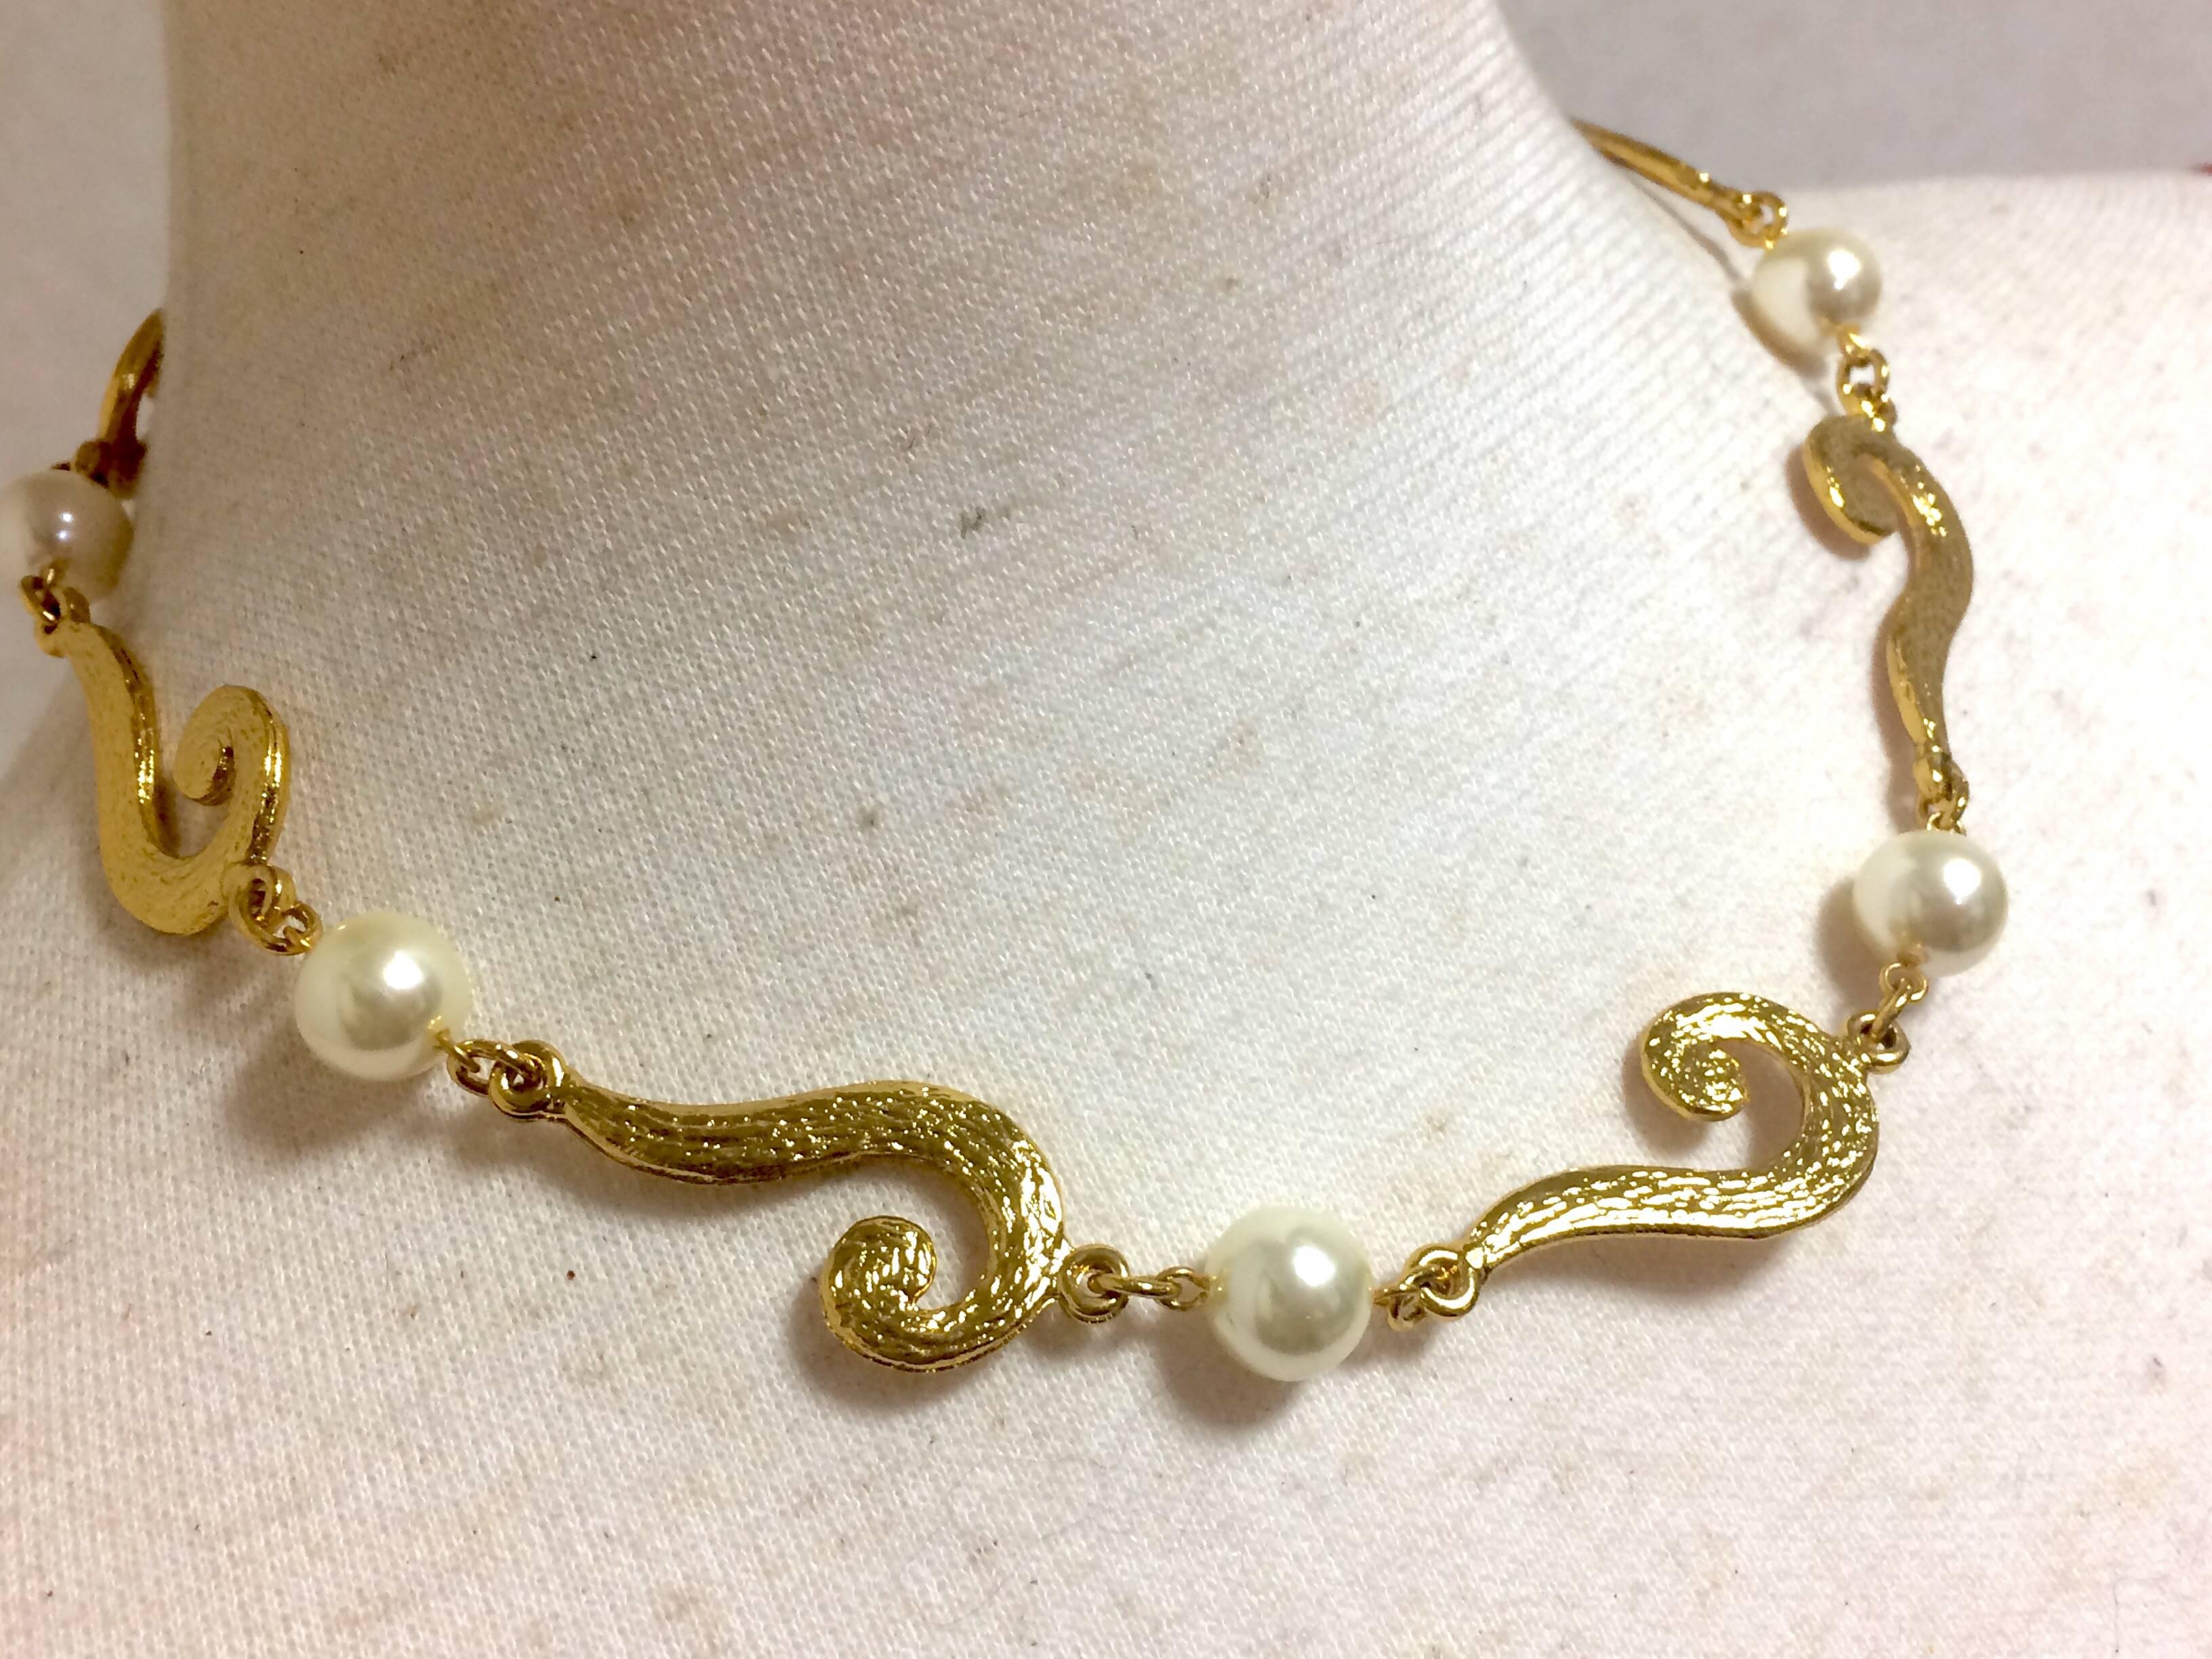 MINT. Vintage Moschino chain necklace with golden question marks and faux pearls For Sale 3